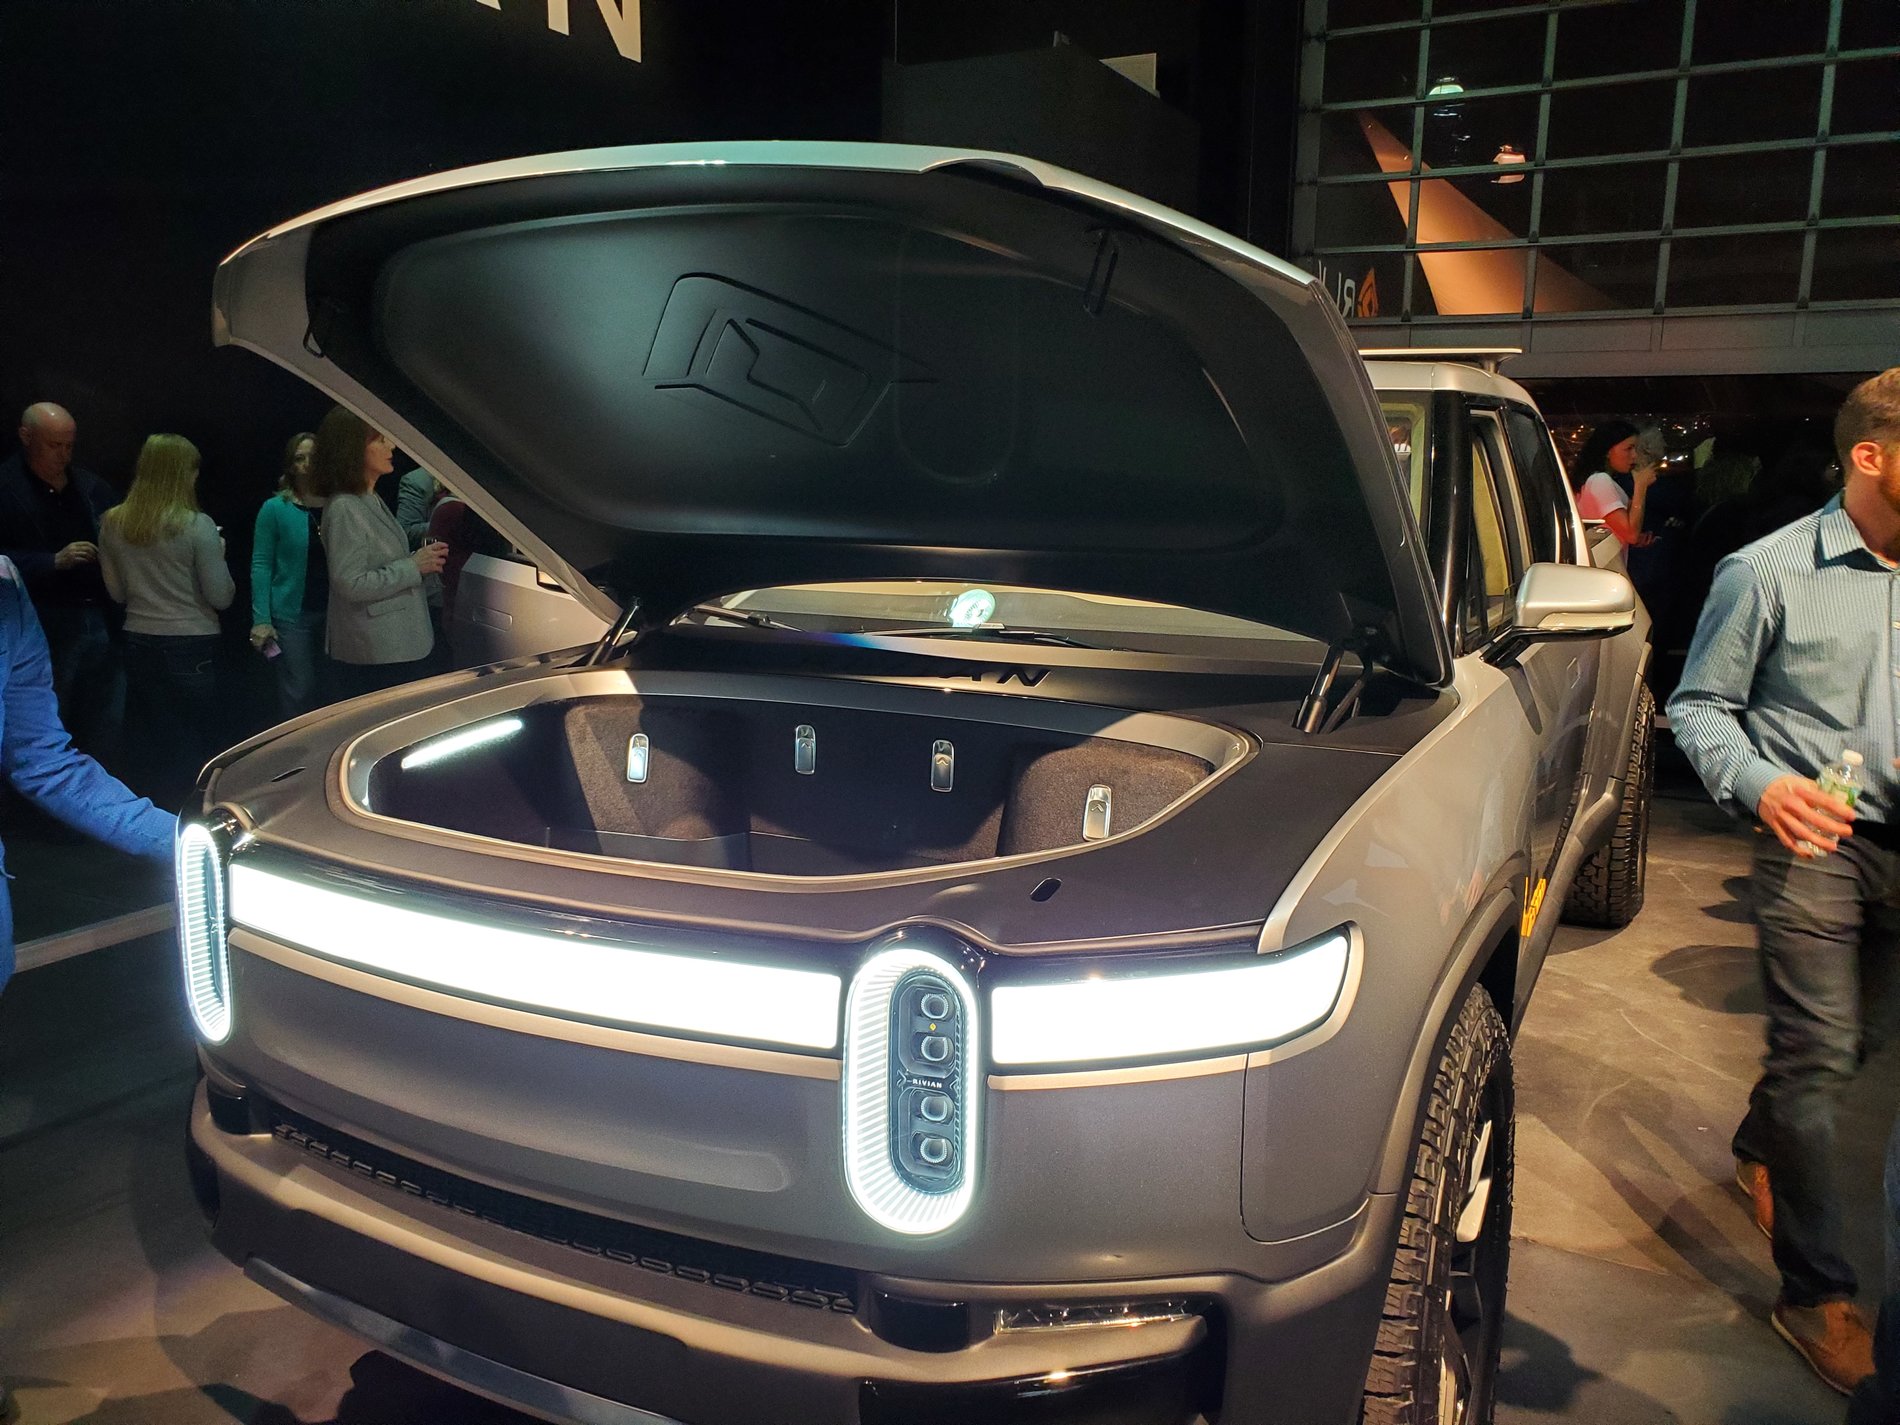 Rivian R1T R1S LIVE from Rivian's NY Auto Show Preview Event! (Q&A and R1T / R1S Hands-On) 20190412_201257